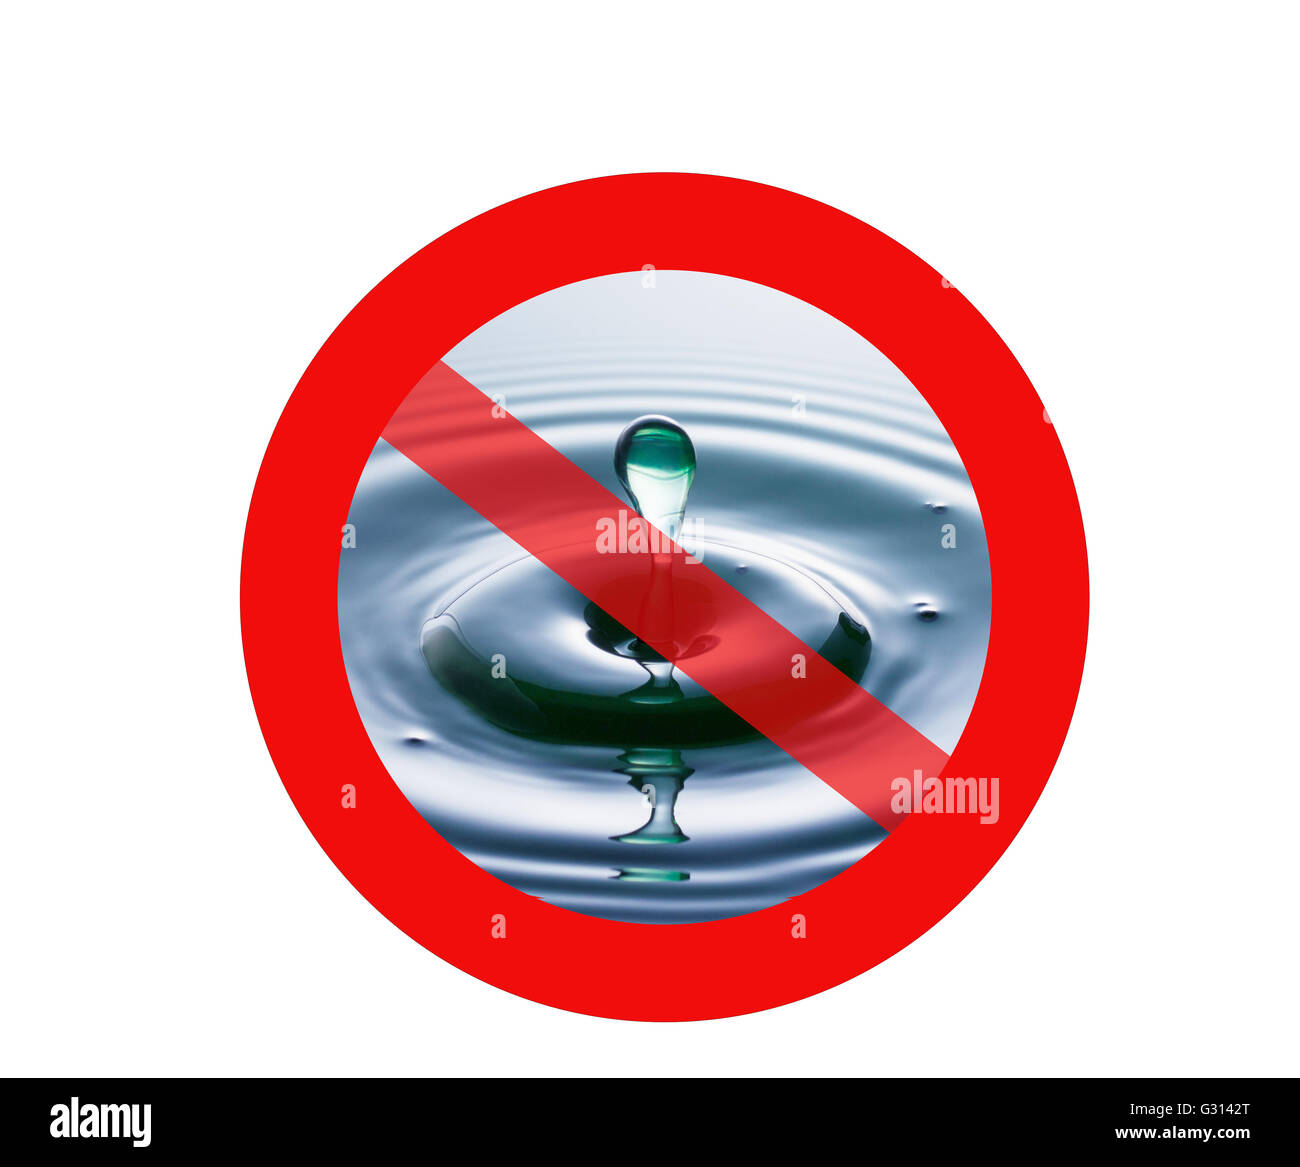 Water Crisis - A drop of water plopping into water with a 'no access' sign superimposed on top, representing no access to water Stock Photo